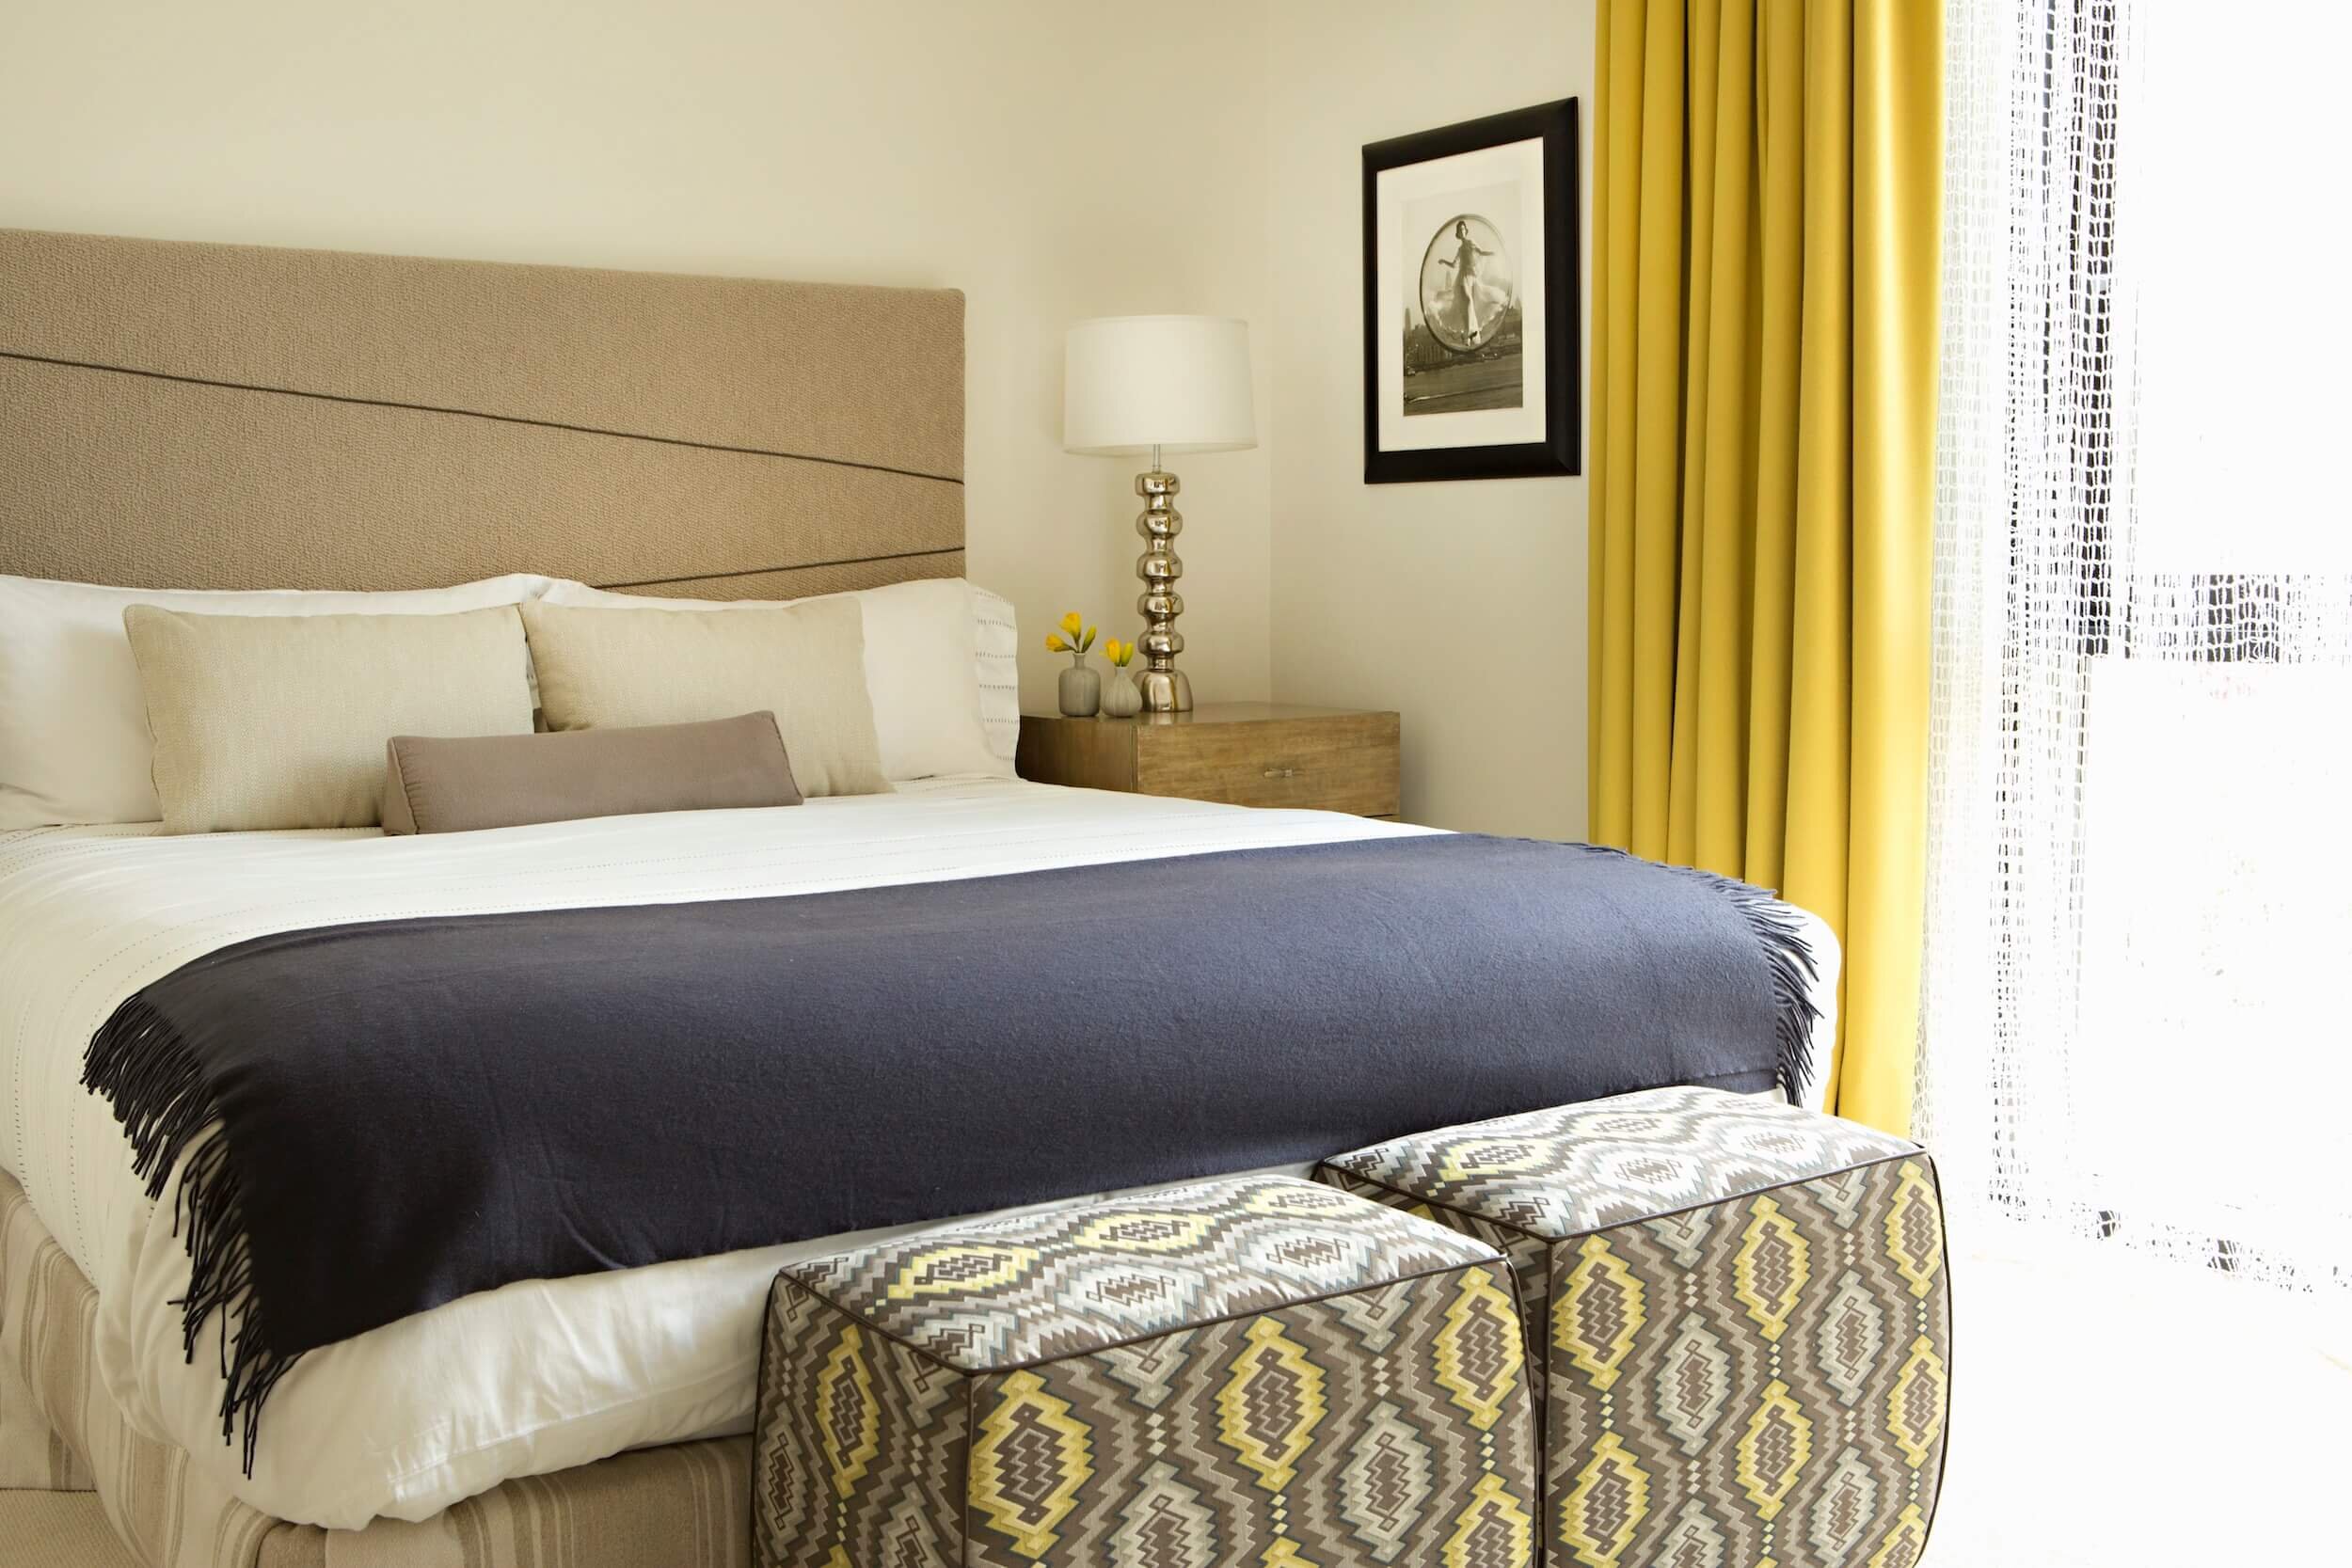 A Guest Bedroom with custom golden alpaca drapery and a bed with a handwoven cashmere headboard.